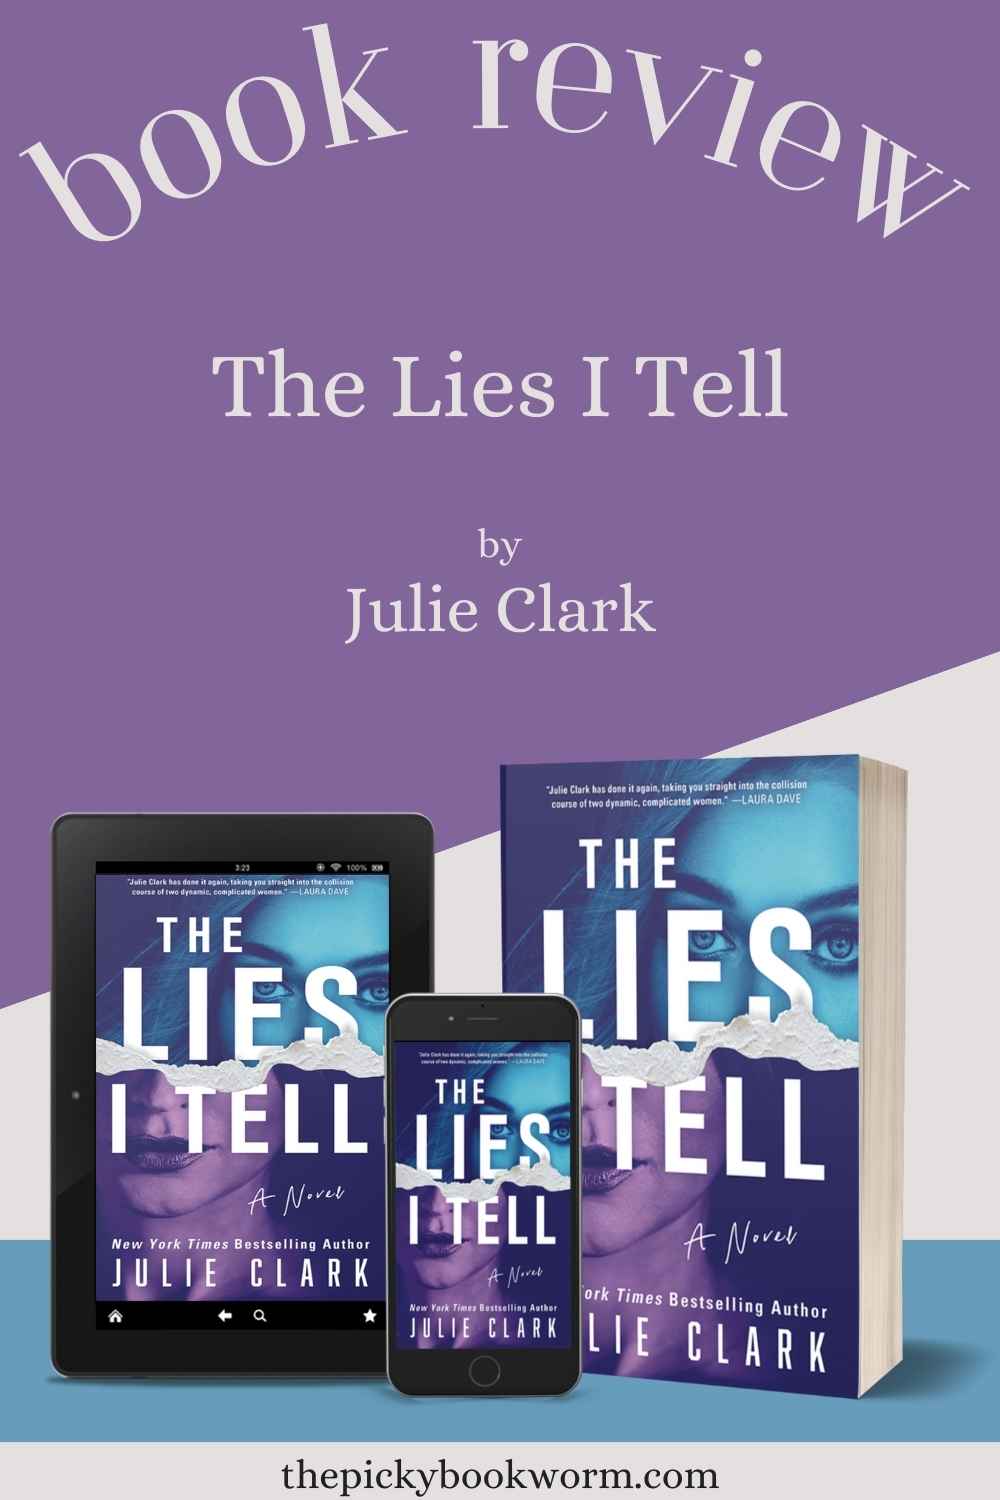 Book Review of The Lies I tell by Julie Clark on The Picky Bookworm Blog. Meg and Kat are two women, driven together by a secret. Can they choose to work together and save those they care about, or will their secrets come between them once and for all?